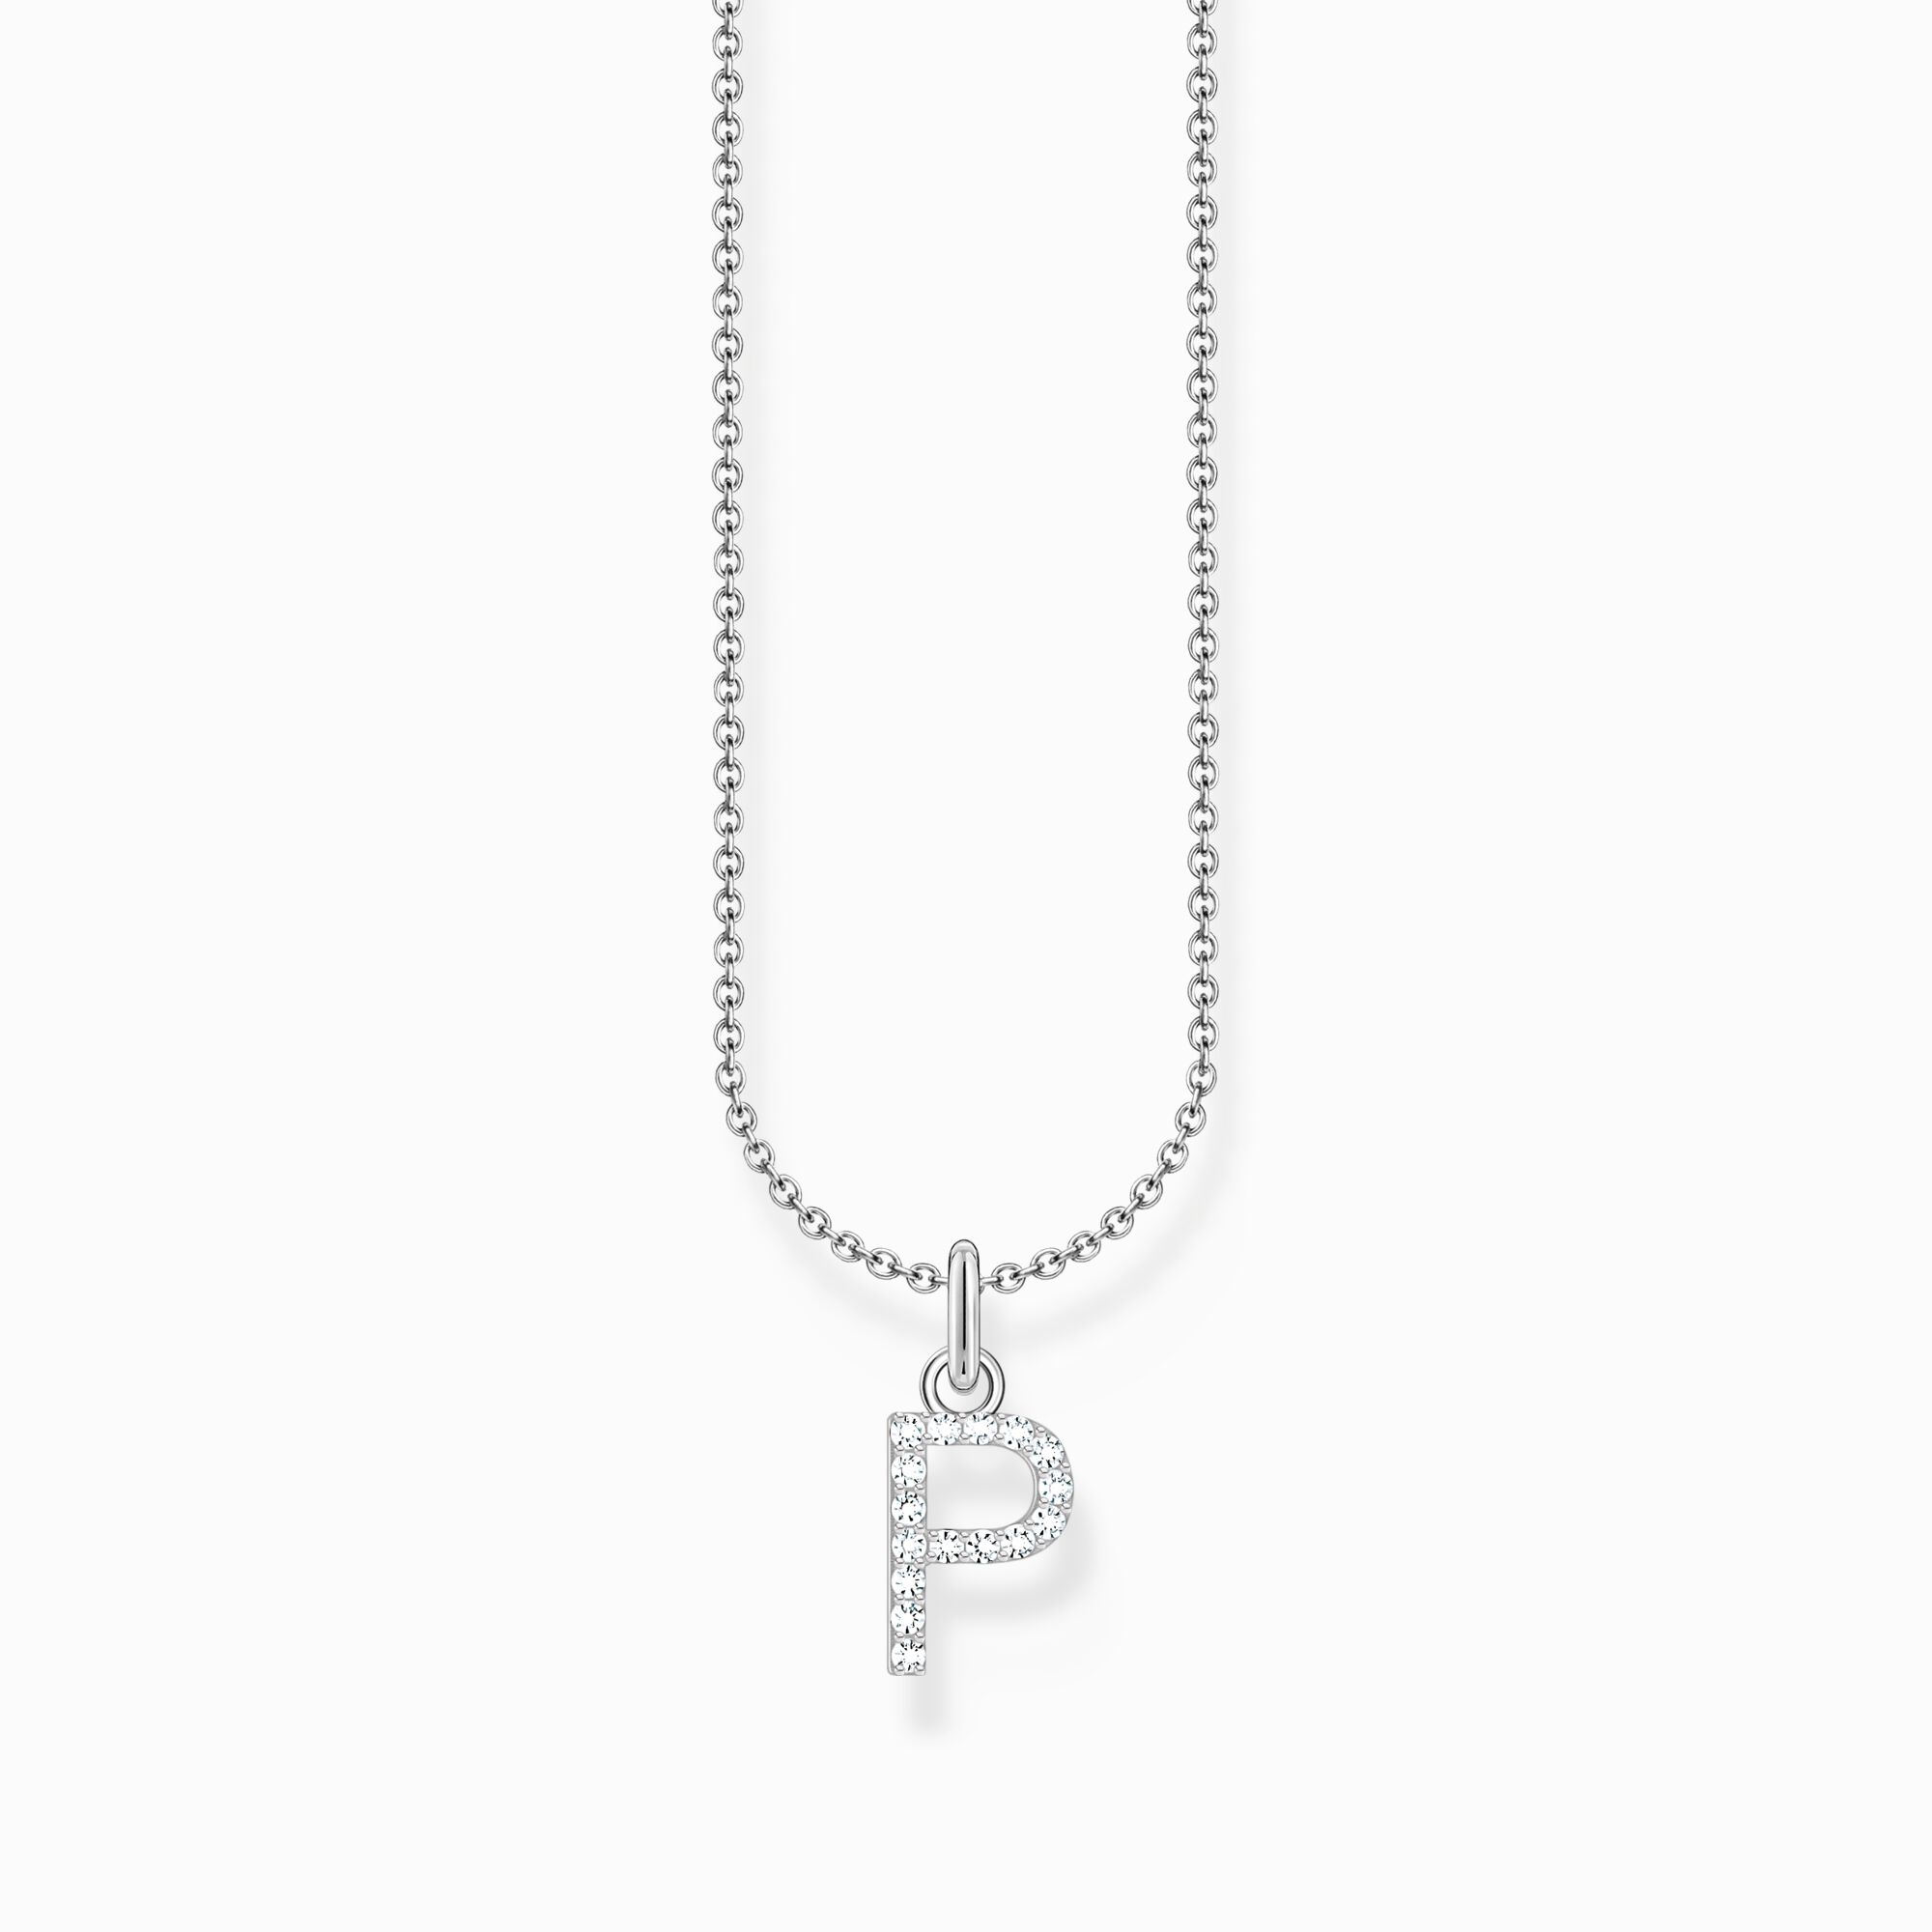 Silver necklace with letter pendant P and white zirconia from the Charming Collection collection in the THOMAS SABO online store